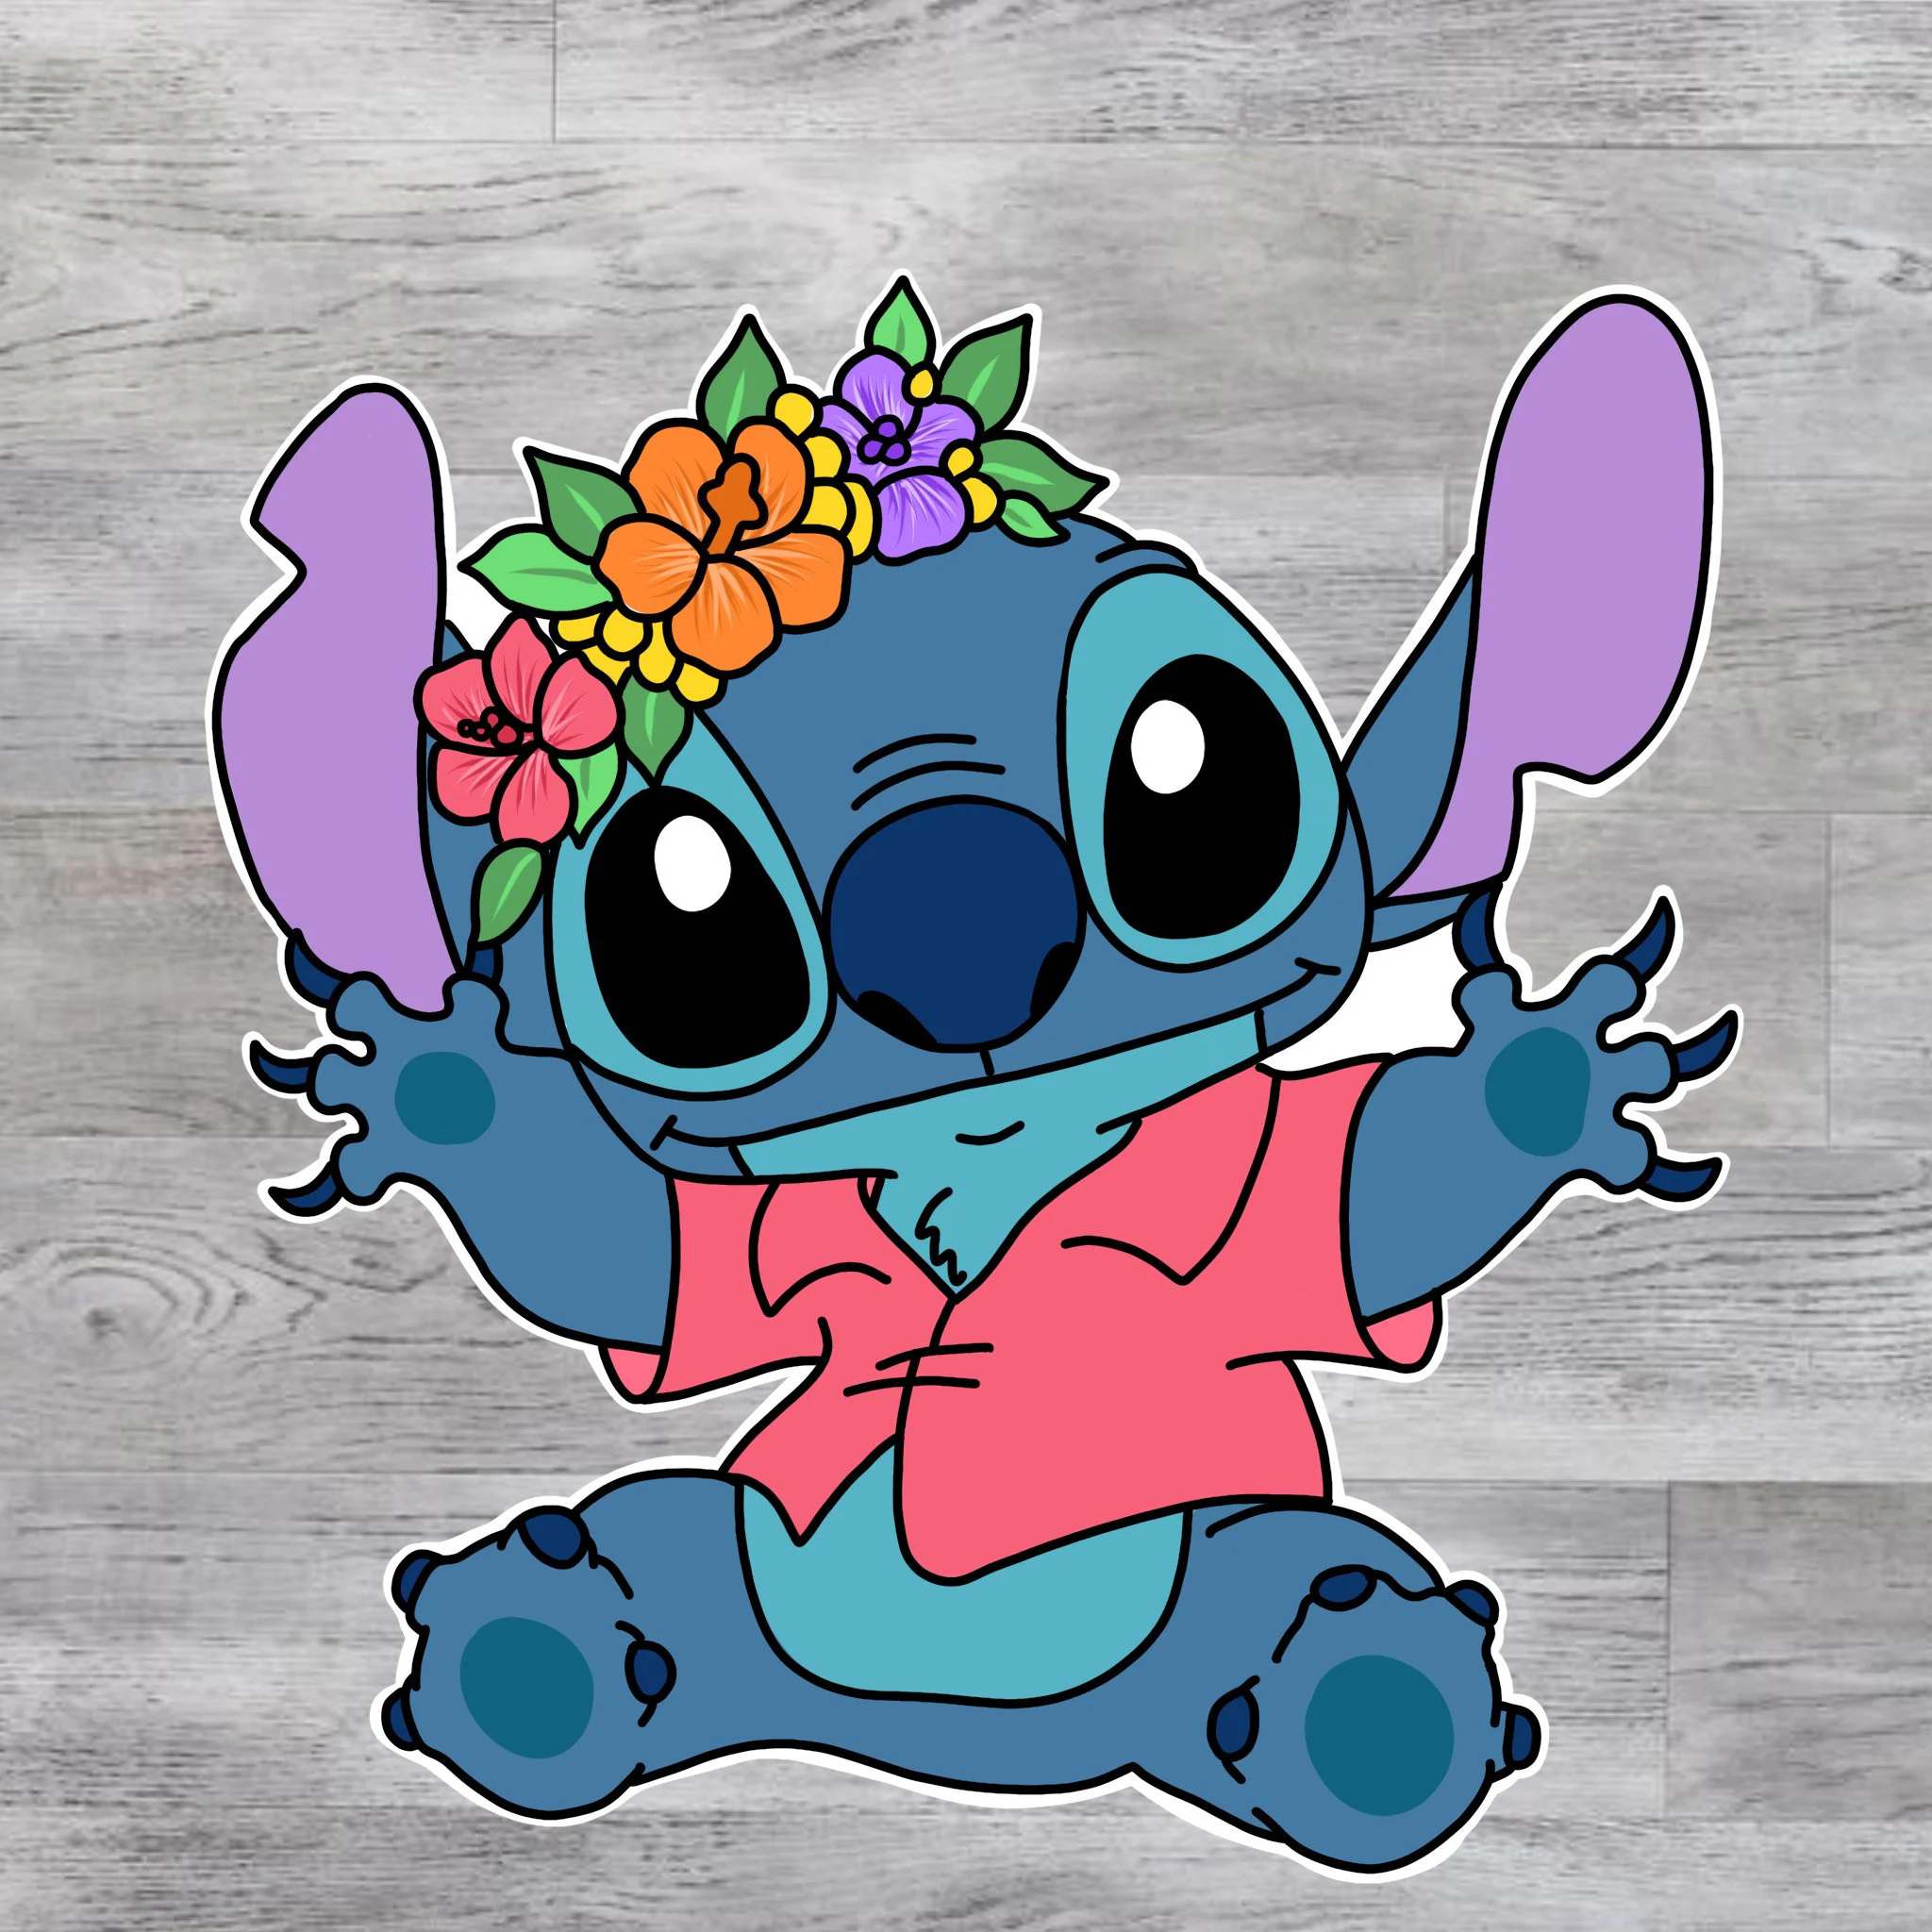 Image of a sticker of the character Stitch from the disney movie 'Lilo and Stitch'